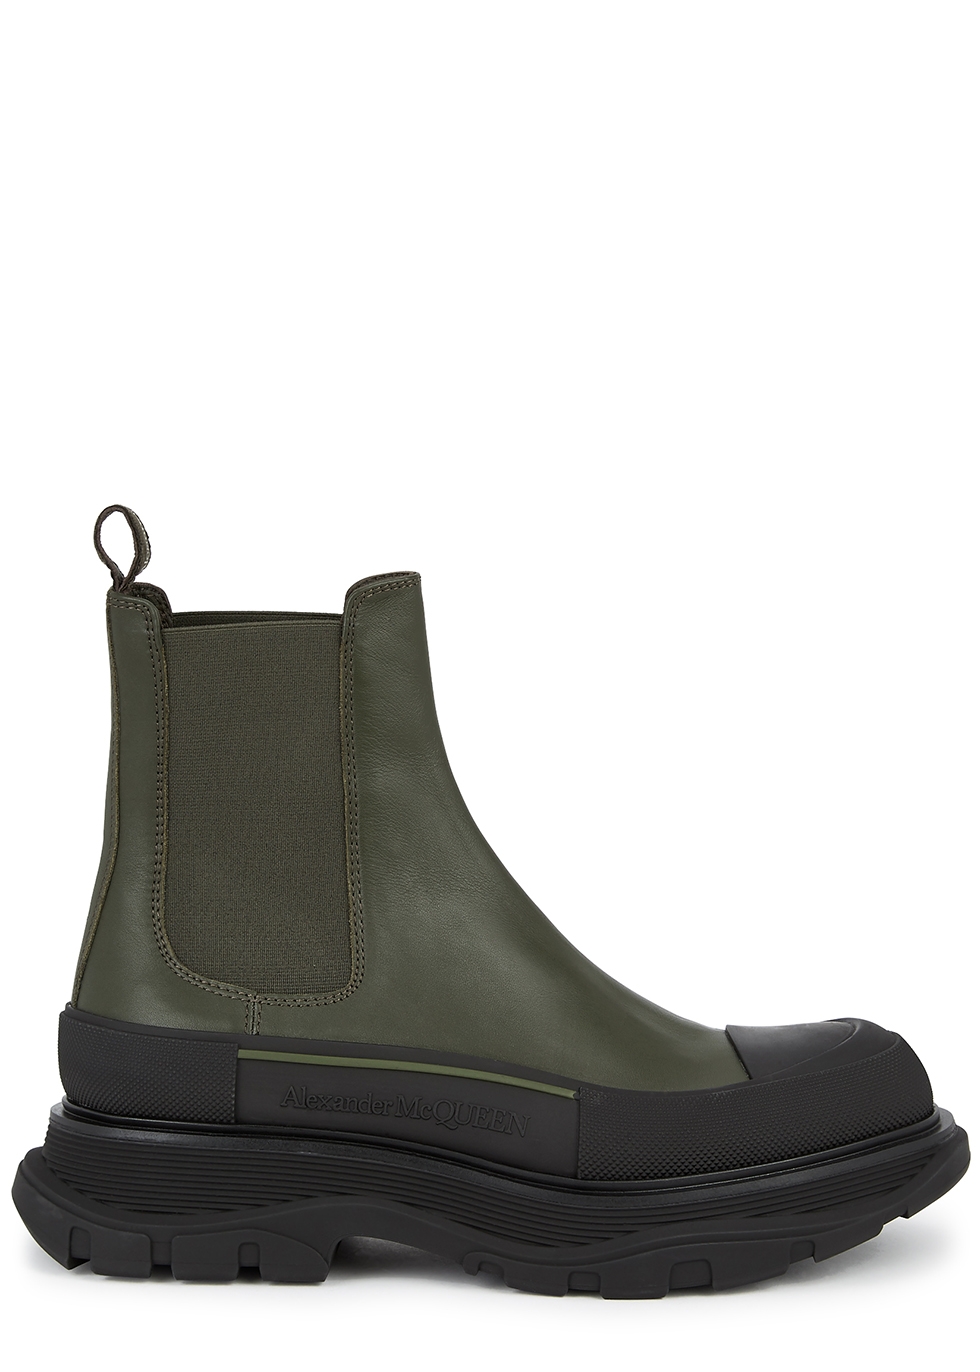 olive green givenchy boots